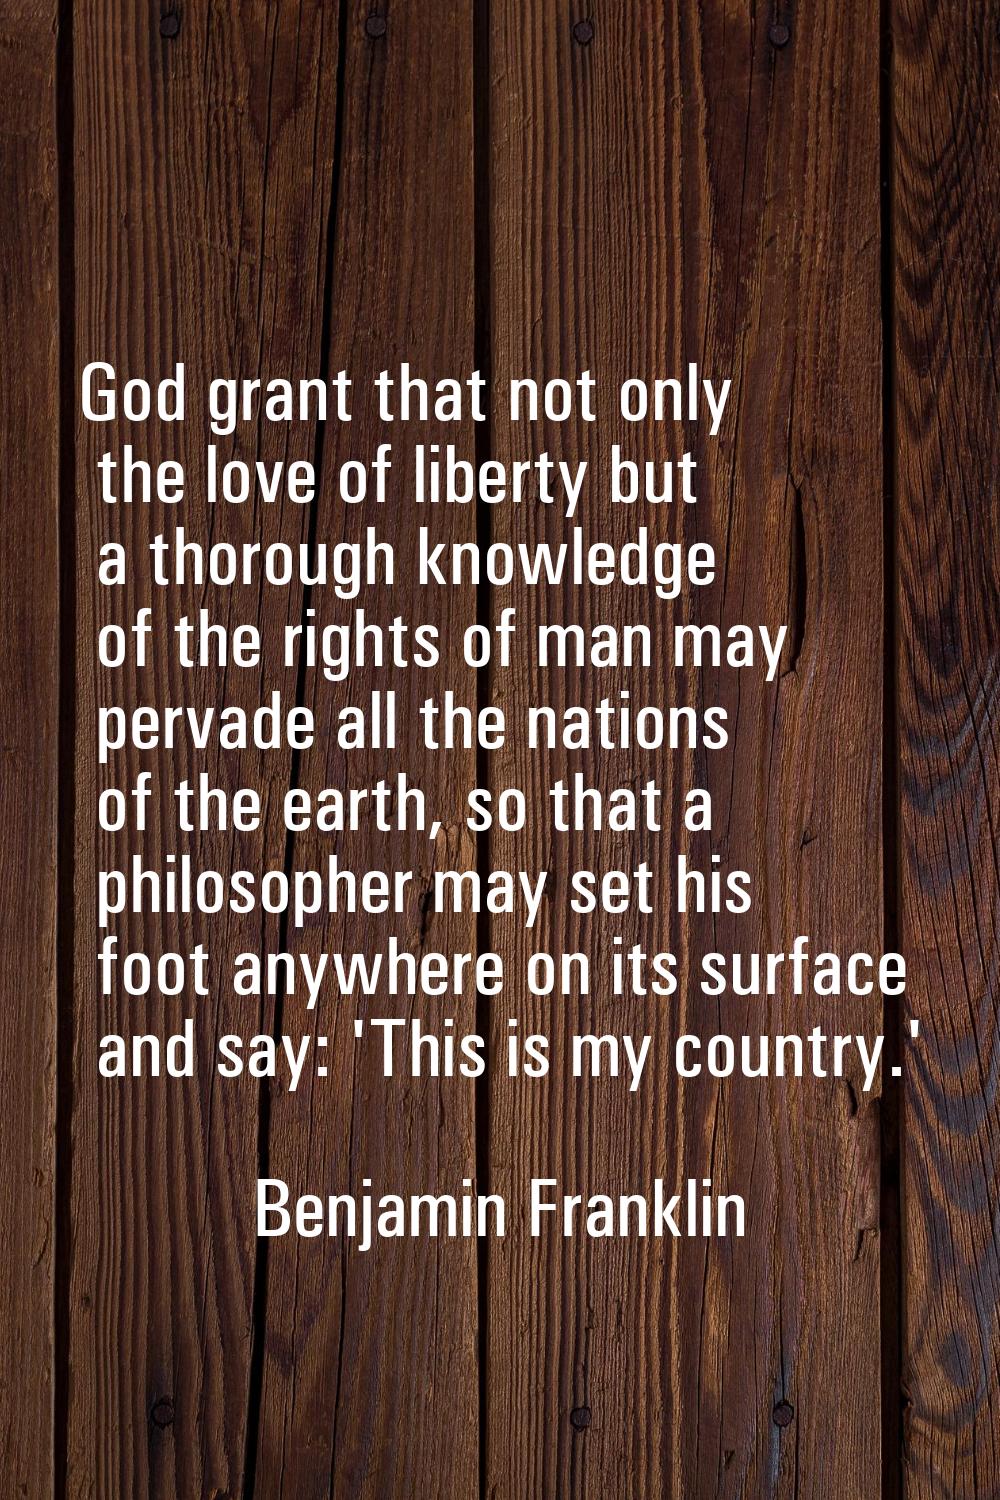 God grant that not only the love of liberty but a thorough knowledge of the rights of man may perva